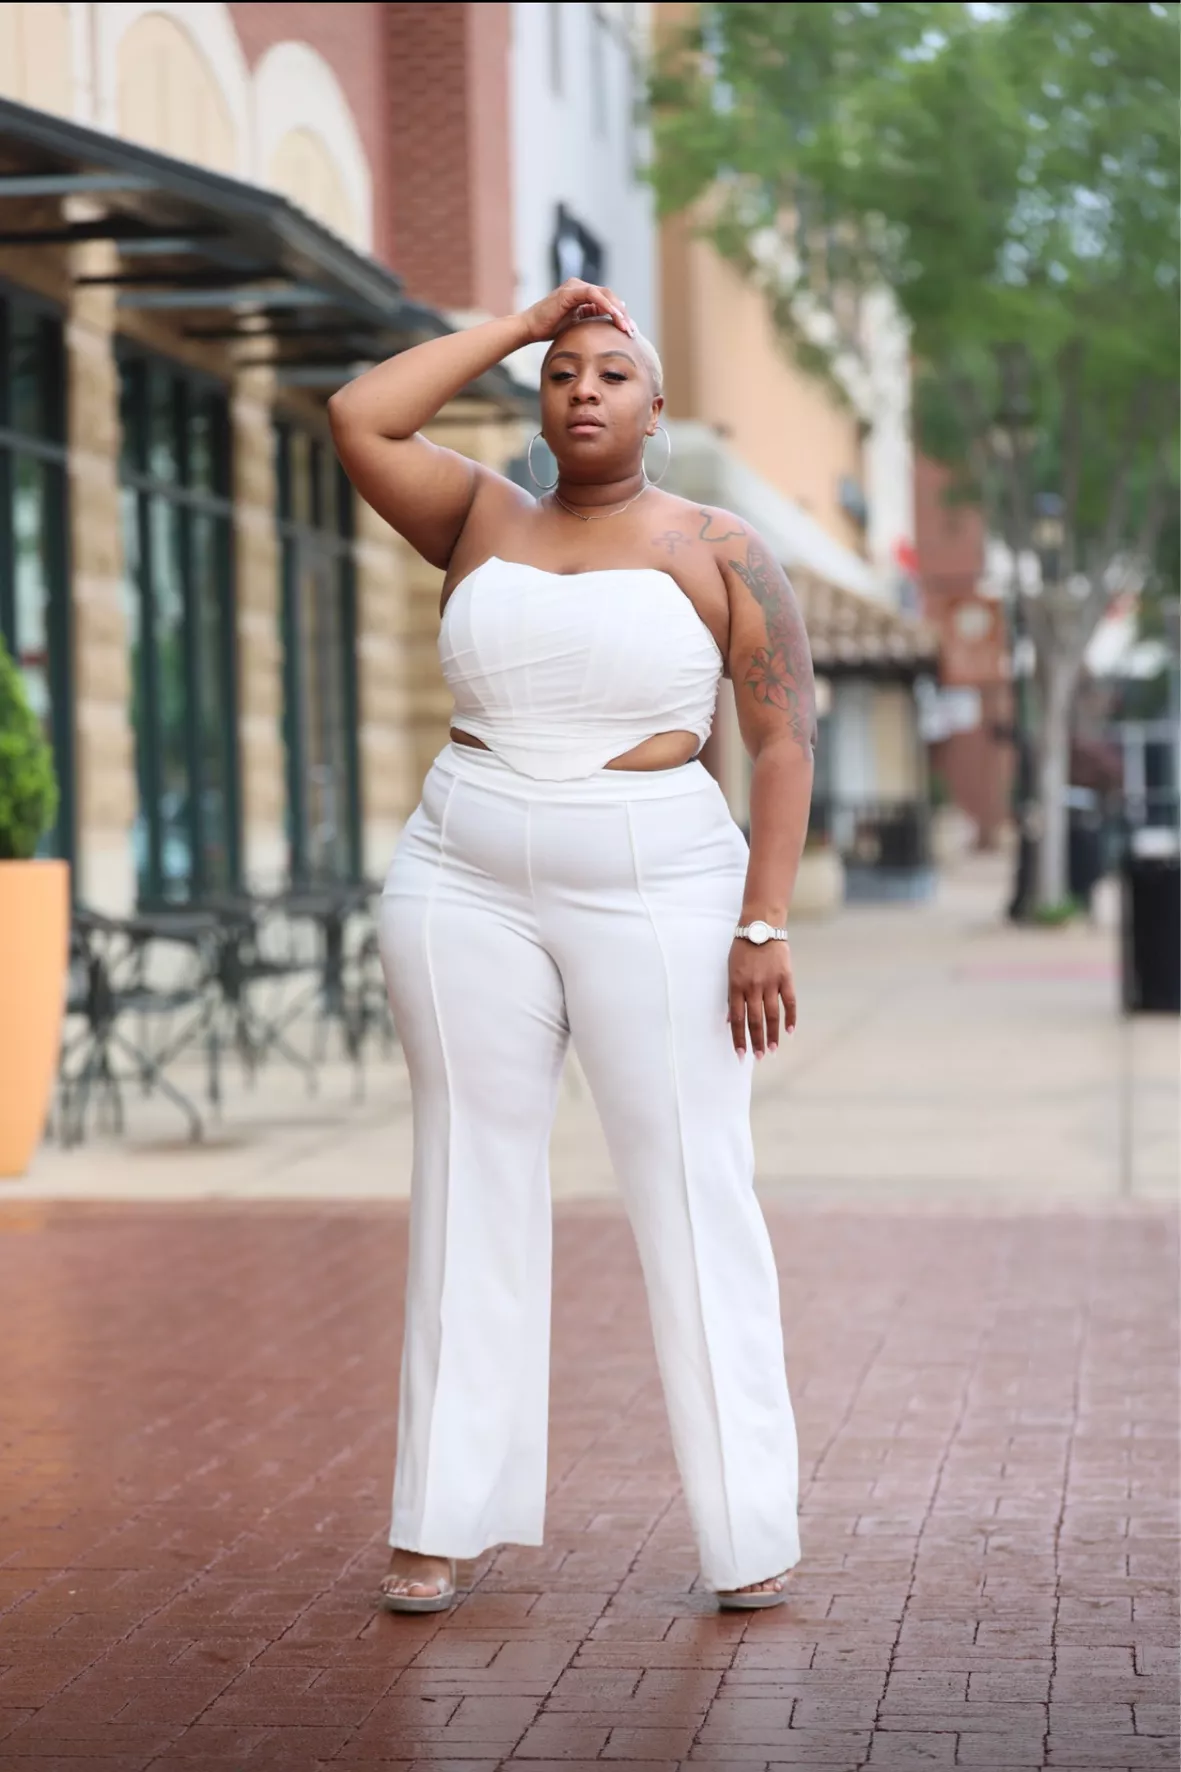 Cute Plus Size Summer Outfits love the corset waist